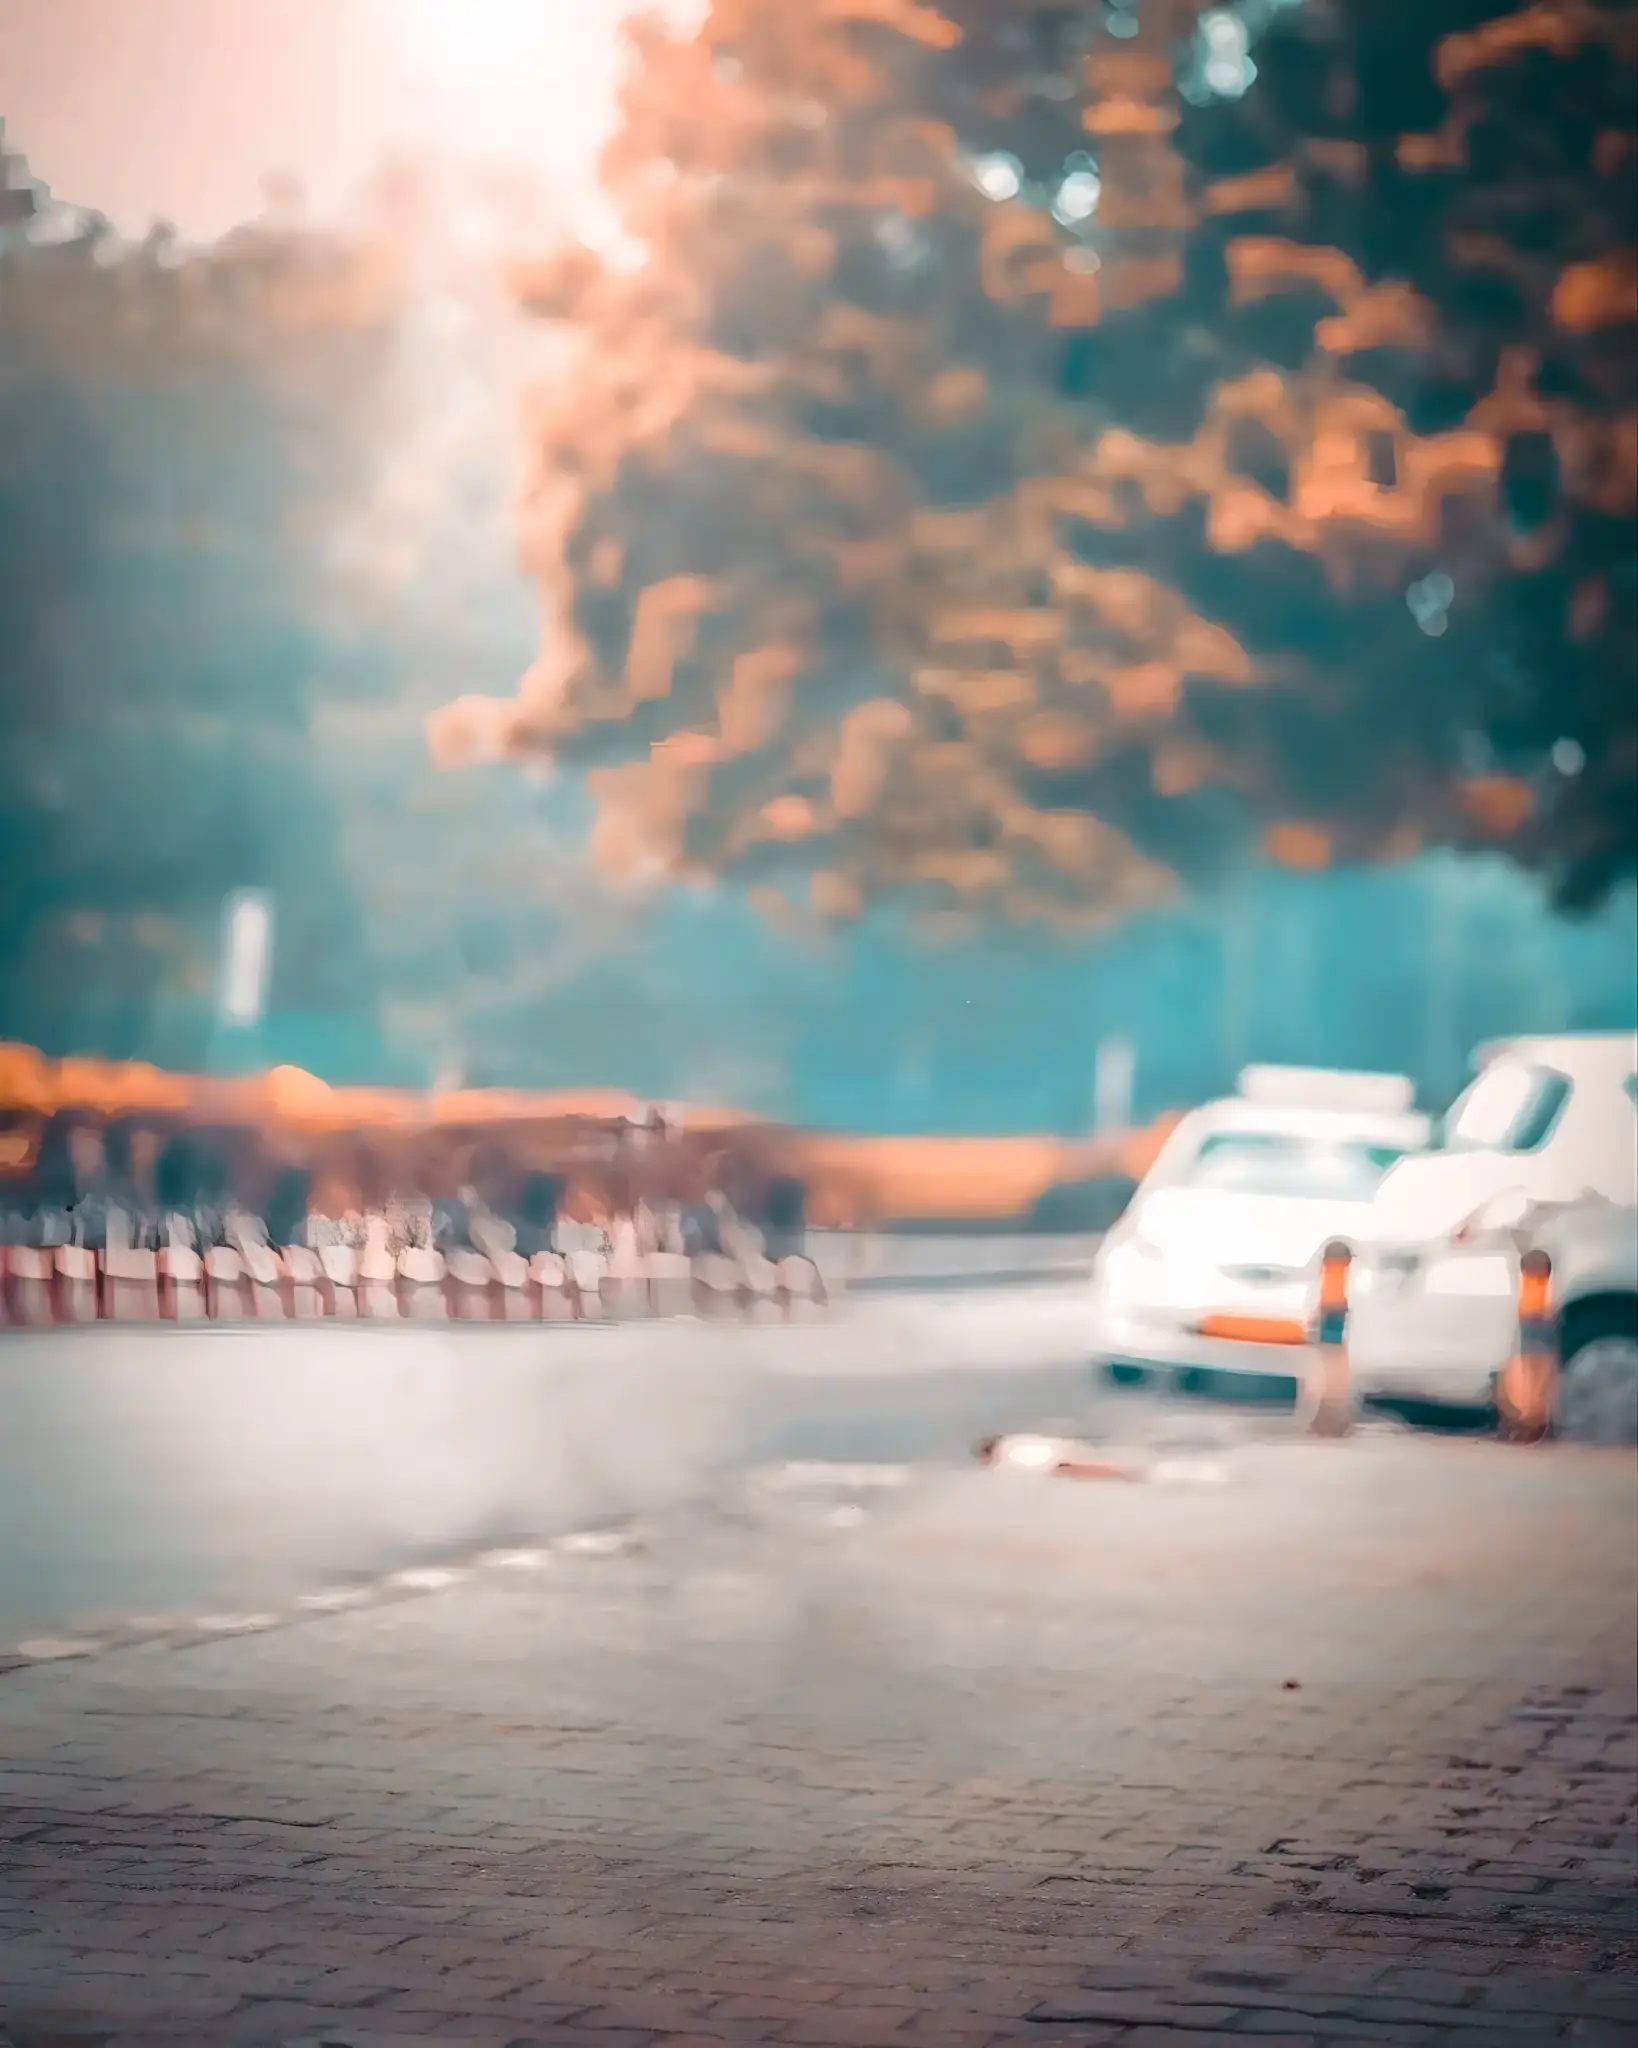 You are currently viewing Picsart blur road background download hd